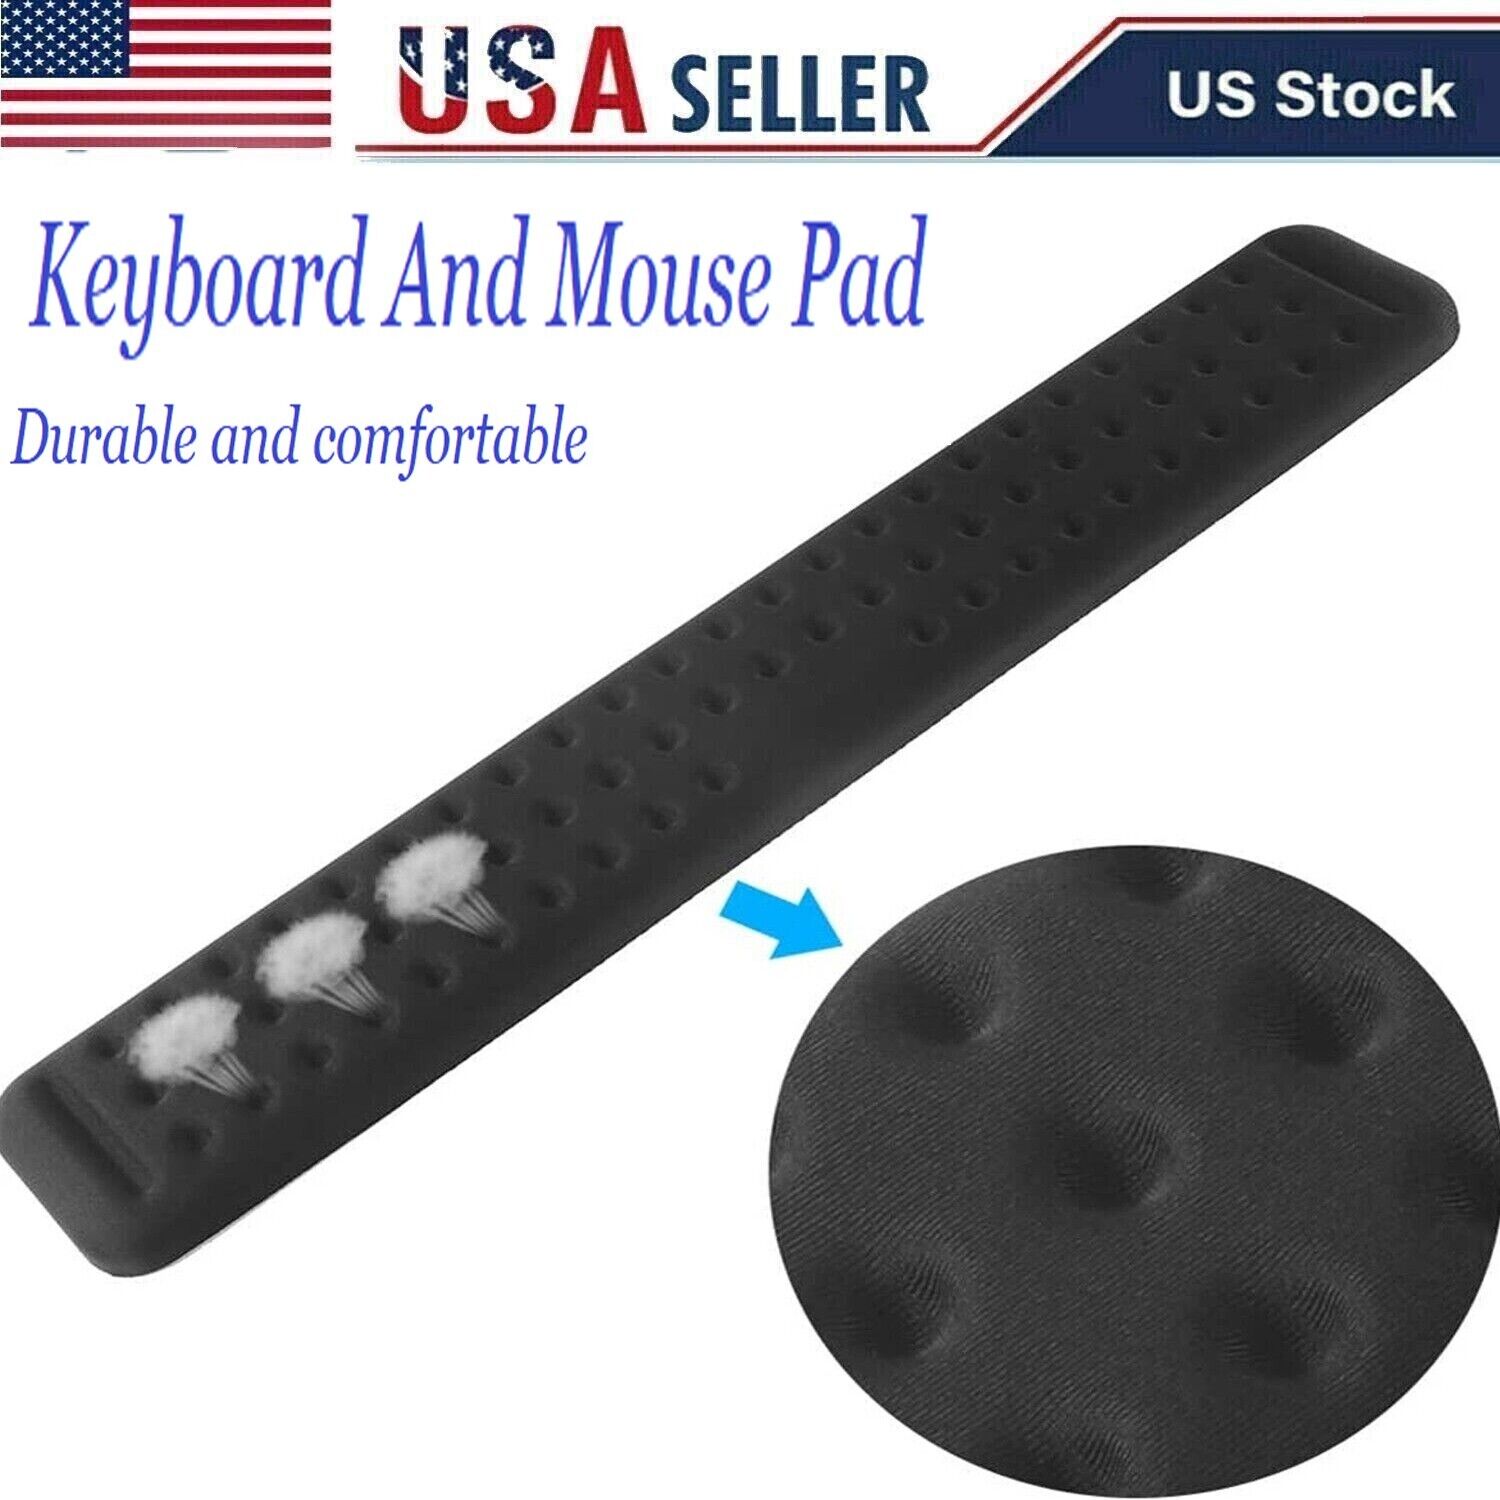 Combo Set Of Mouse & Keyboard Pad to Wrist Rest for Easy Typing and Pain Relief